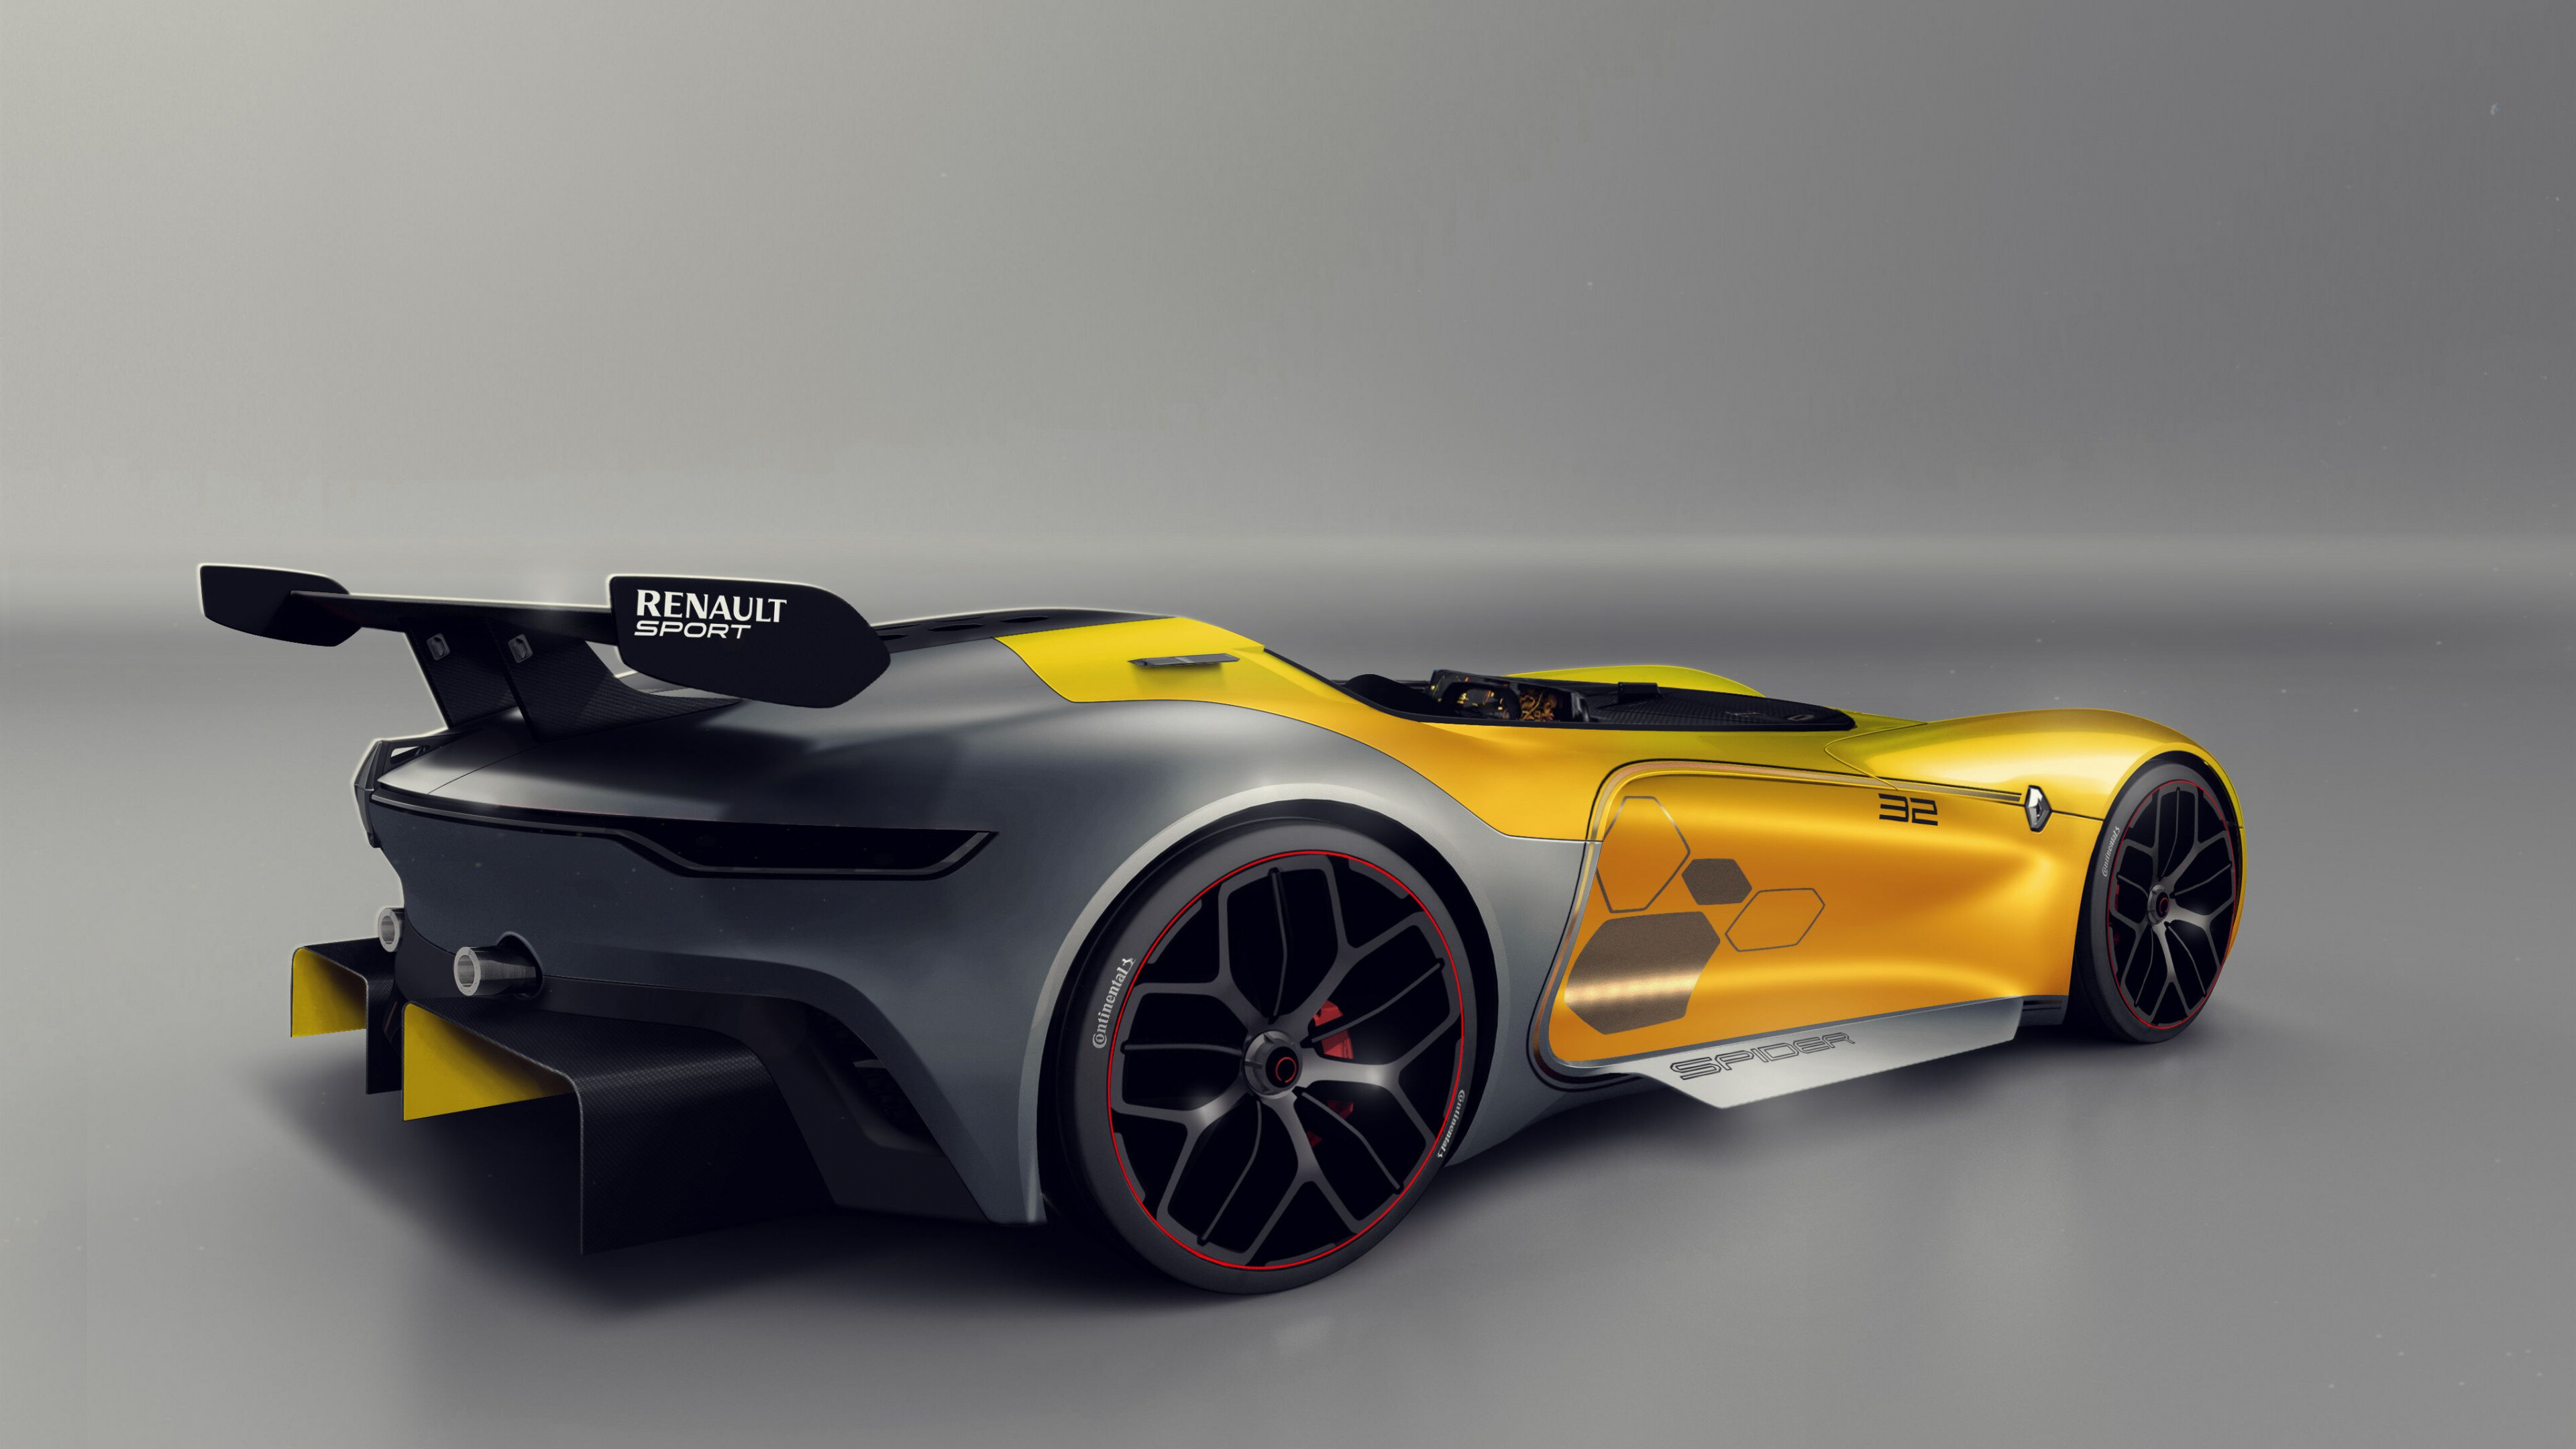 Renault: One of the most well-known brands in Europe, Sports car. 3840x2160 4K Wallpaper.